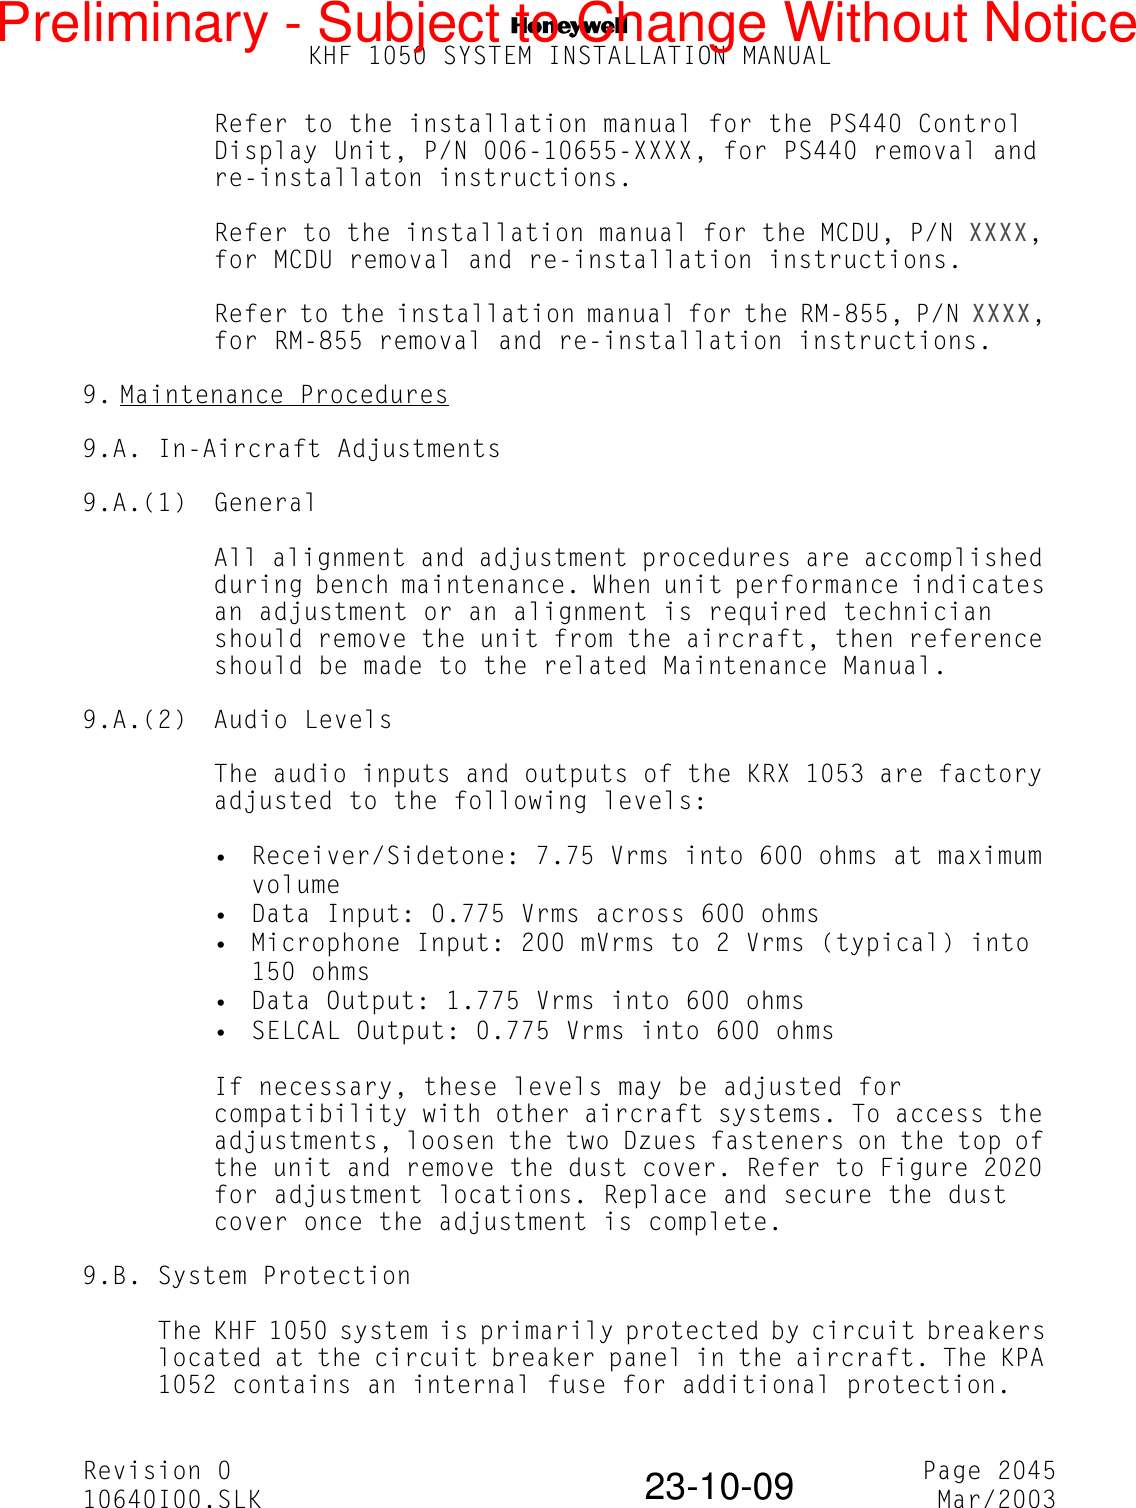 NKHF 1050 SYSTEM INSTALLATION MANUALRevision 0 Page 204510640I00.SLK Mar/200323-10-09Refer to the installation manual for the PS440 Control Display Unit, P/N 006-10655-XXXX, for PS440 removal and re-installaton instructions.Refer to the installation manual for the MCDU, P/N XXXX, for MCDU removal and re-installation instructions.Refer to the installation manual for the RM-855, P/N XXXX, for RM-855 removal and re-installation instructions.9. Maintenance Procedures9.A. In-Aircraft Adjustments9.A.(1) GeneralAll alignment and adjustment procedures are accomplished during bench maintenance. When unit performance indicates an adjustment or an alignment is required technician should remove the unit from the aircraft, then reference should be made to the related Maintenance Manual.9.A.(2) Audio LevelsThe audio inputs and outputs of the KRX 1053 are factory adjusted to the following levels:• Receiver/Sidetone: 7.75 Vrms into 600 ohms at maximum volume• Data Input: 0.775 Vrms across 600 ohms• Microphone Input: 200 mVrms to 2 Vrms (typical) into 150 ohms• Data Output: 1.775 Vrms into 600 ohms• SELCAL Output: 0.775 Vrms into 600 ohmsIf necessary, these levels may be adjusted for compatibility with other aircraft systems. To access the adjustments, loosen the two Dzues fasteners on the top of the unit and remove the dust cover. Refer to Figure 2020 for adjustment locations. Replace and secure the dust cover once the adjustment is complete.9.B. System ProtectionThe KHF 1050 system is primarily protected by circuit breakers located at the circuit breaker panel in the aircraft. The KPA 1052 contains an internal fuse for additional protection.Preliminary - Subject to Change Without Notice